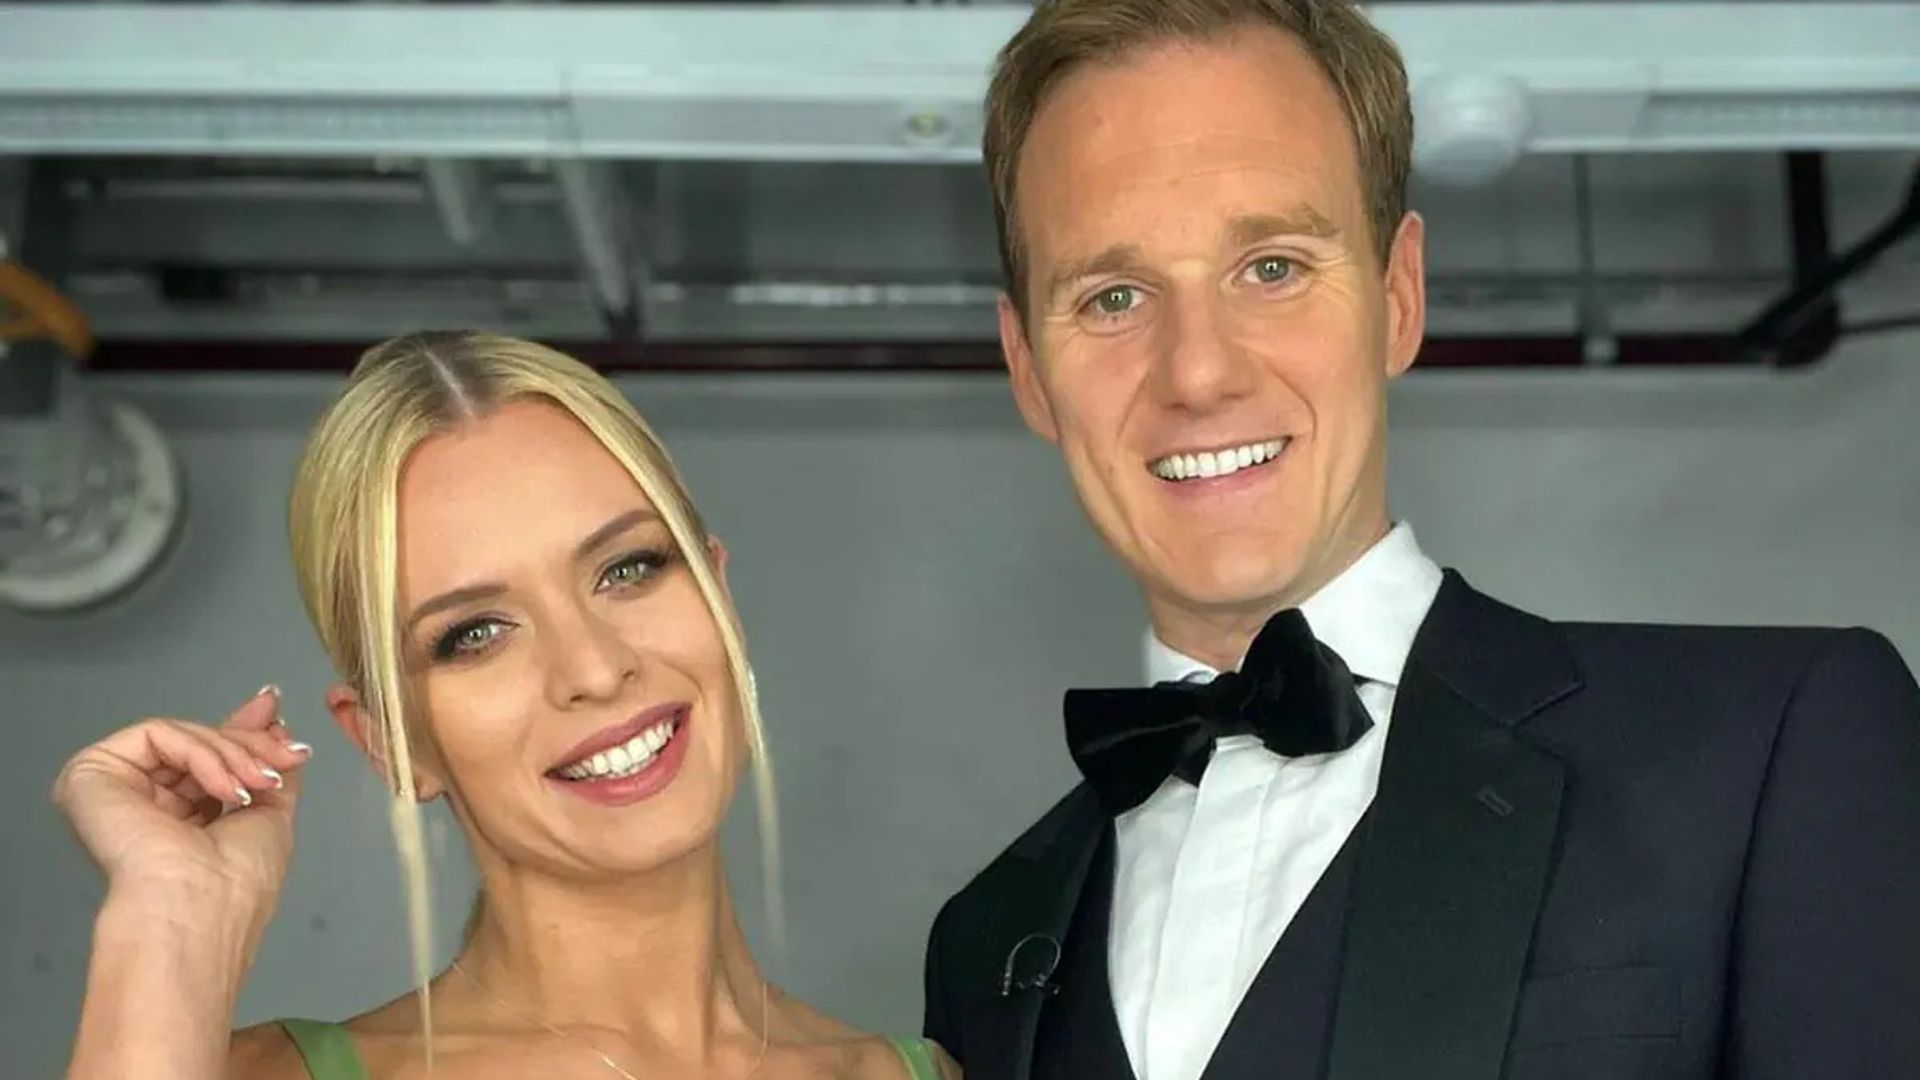 Dan Walker reacts to negative comments following Strictly Halloween performance